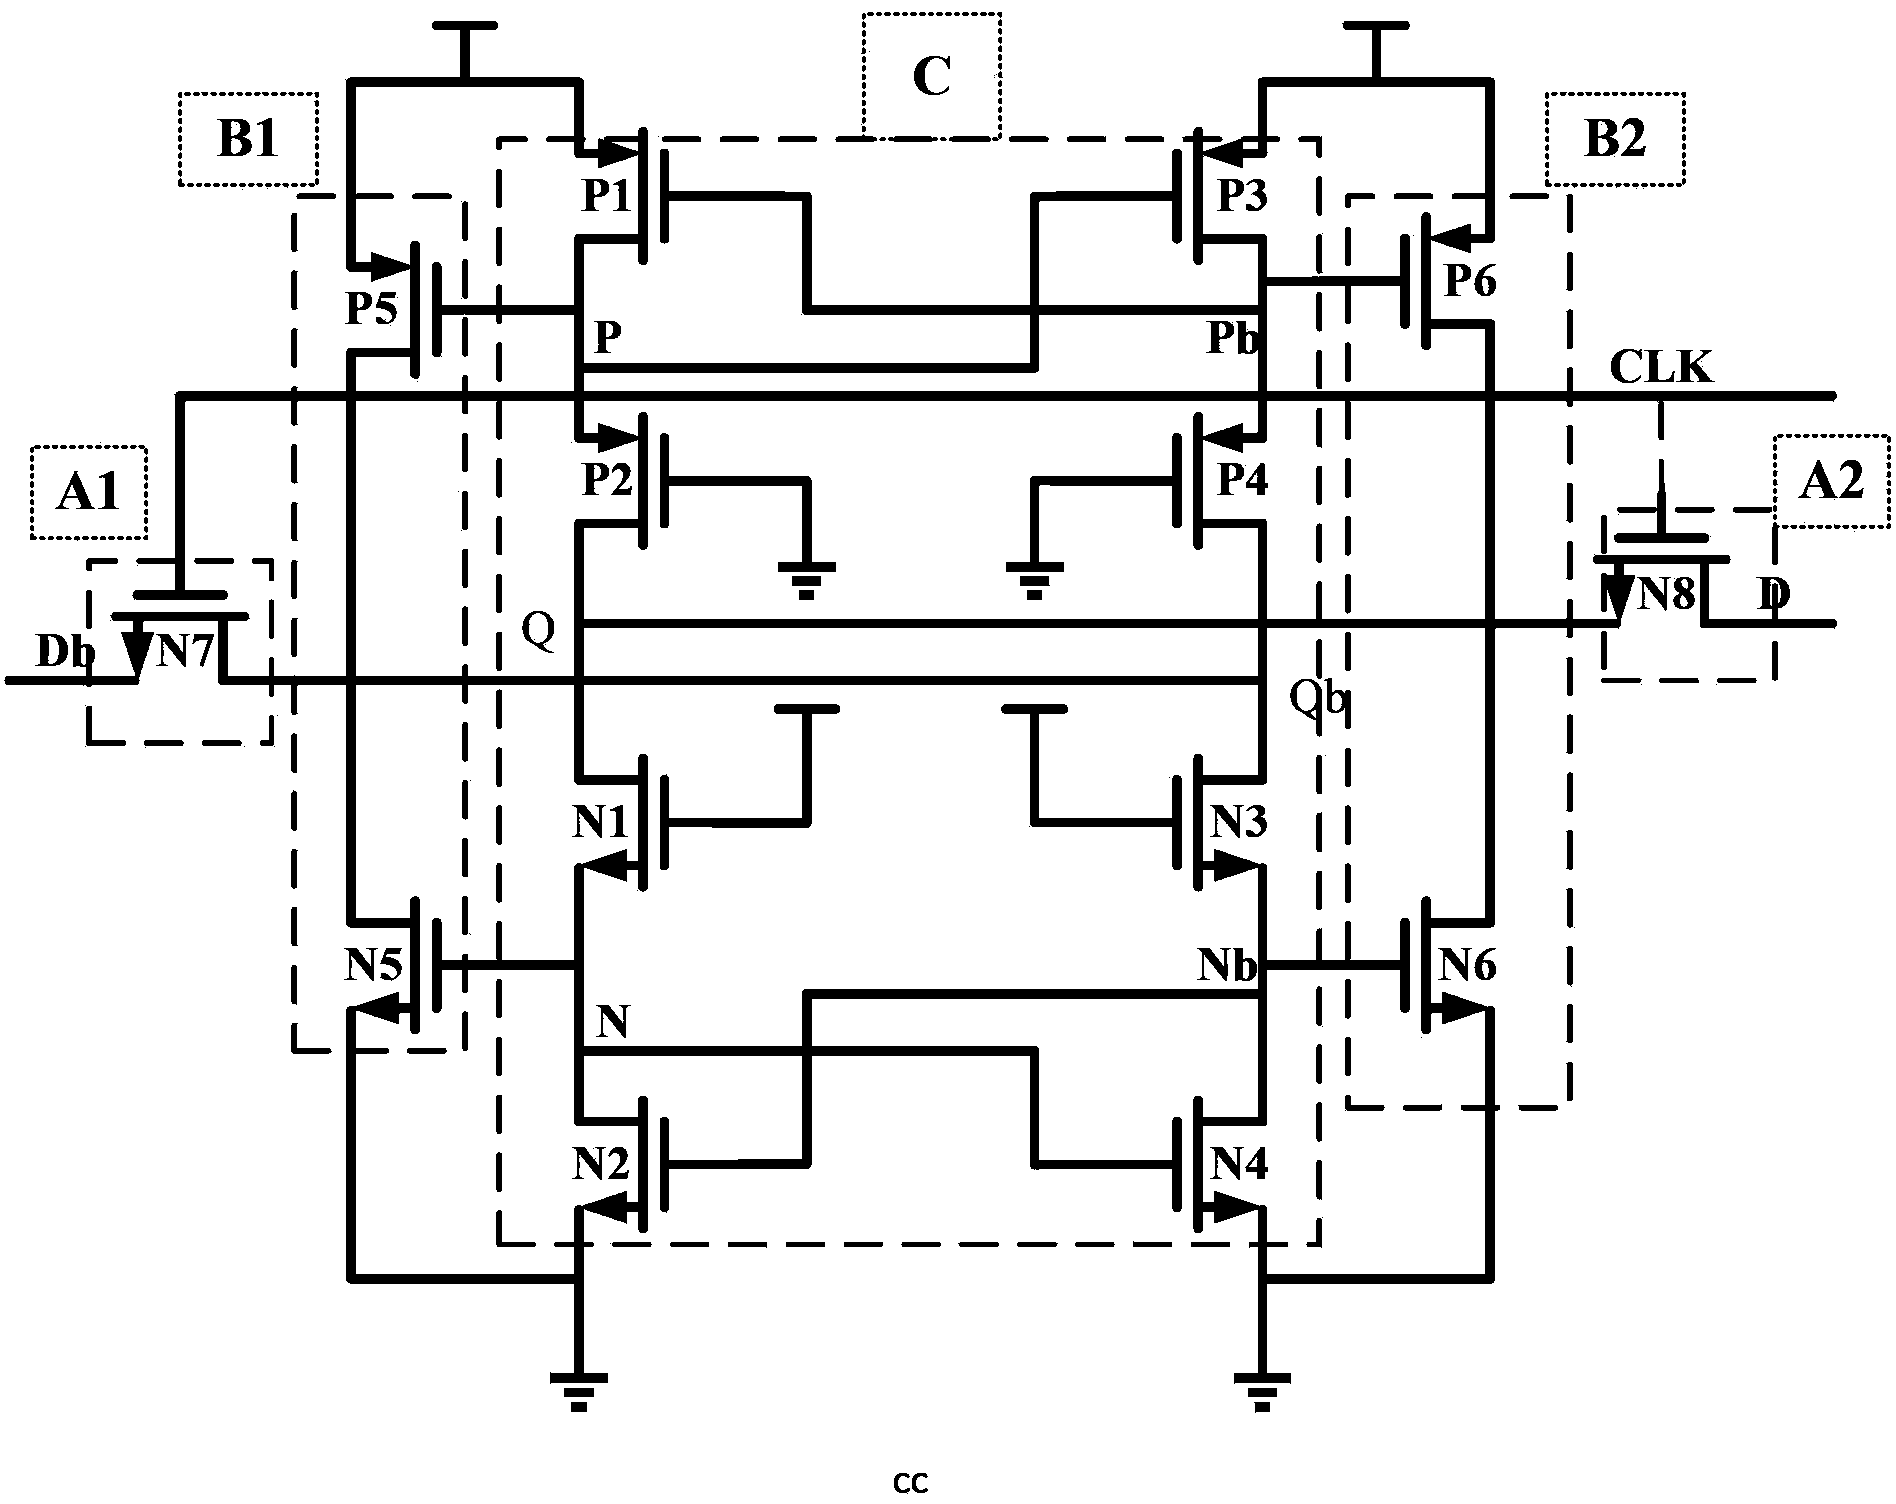 Novel static random access memory (SRAM) storage unit preventing single particle from turning